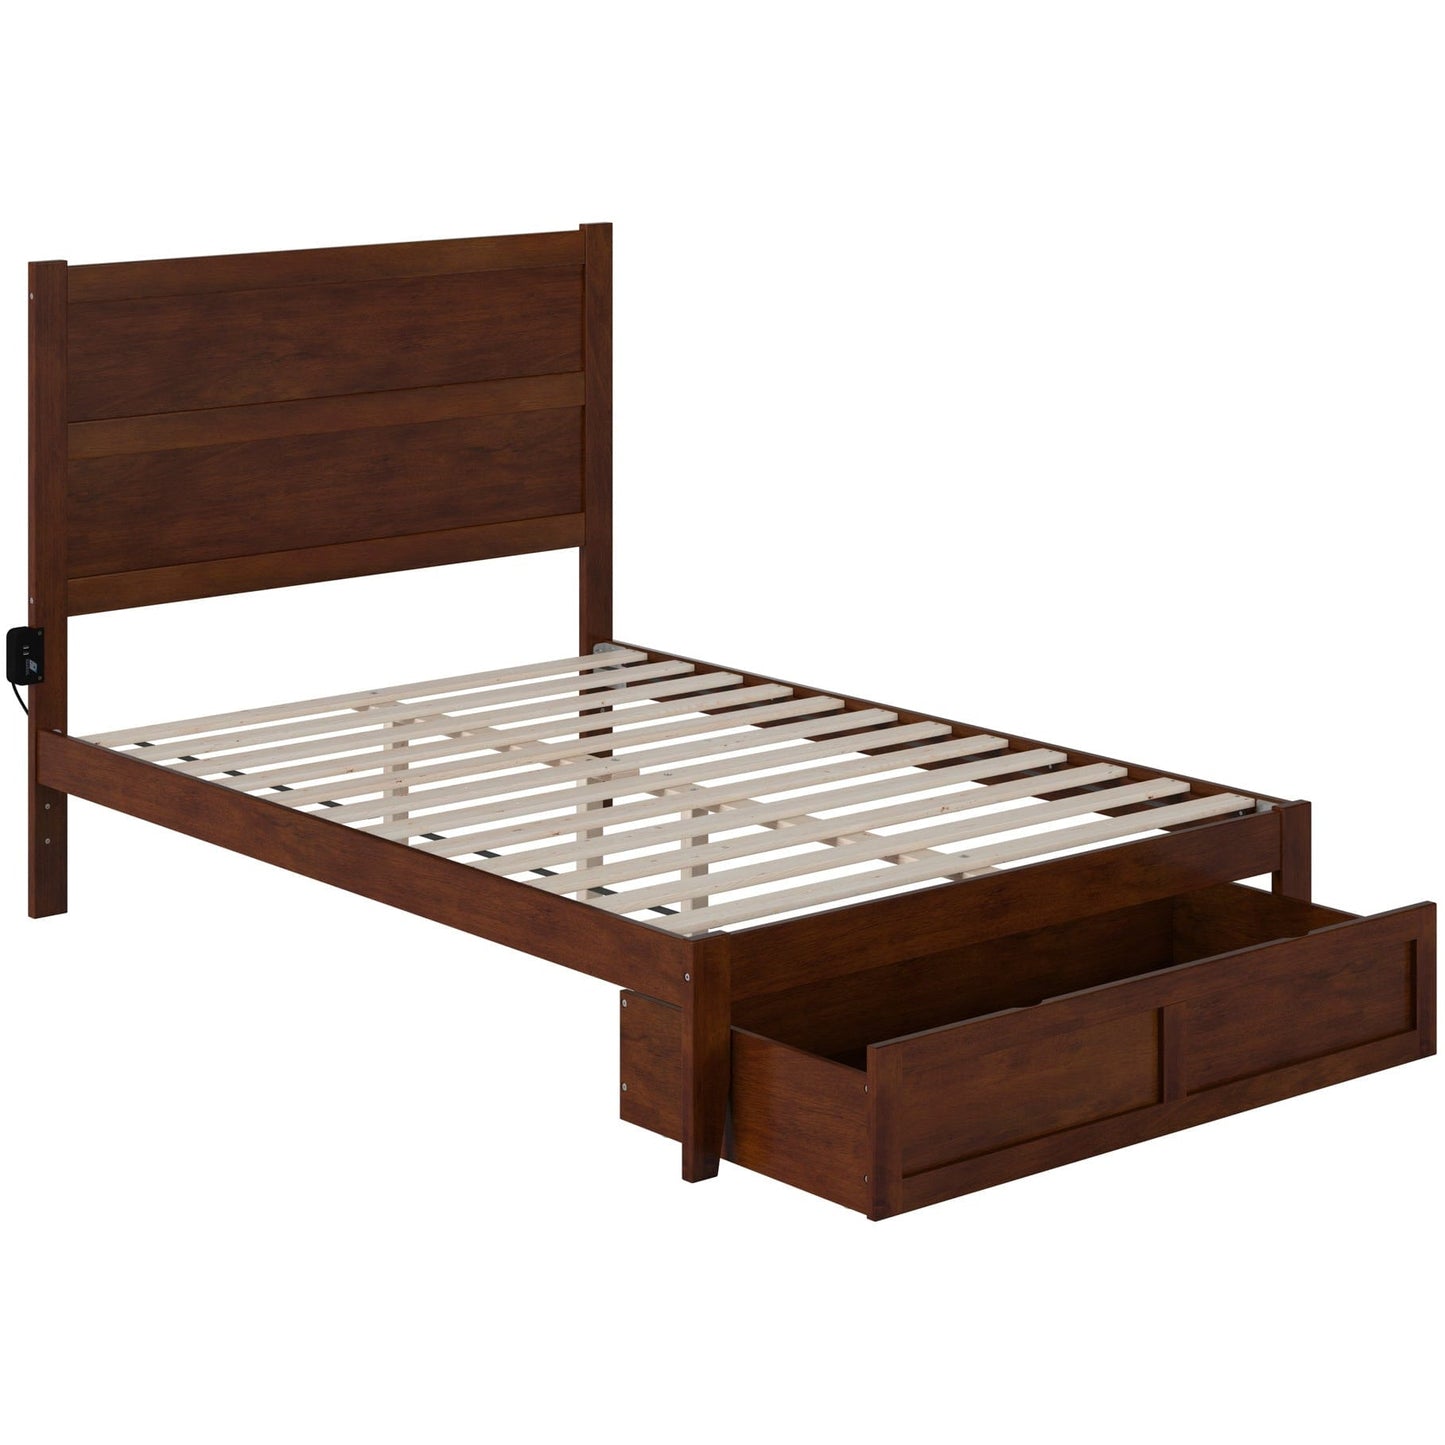 AFI Furnishings NoHo Full Bed with Foot Drawer in Walnut AG9112334